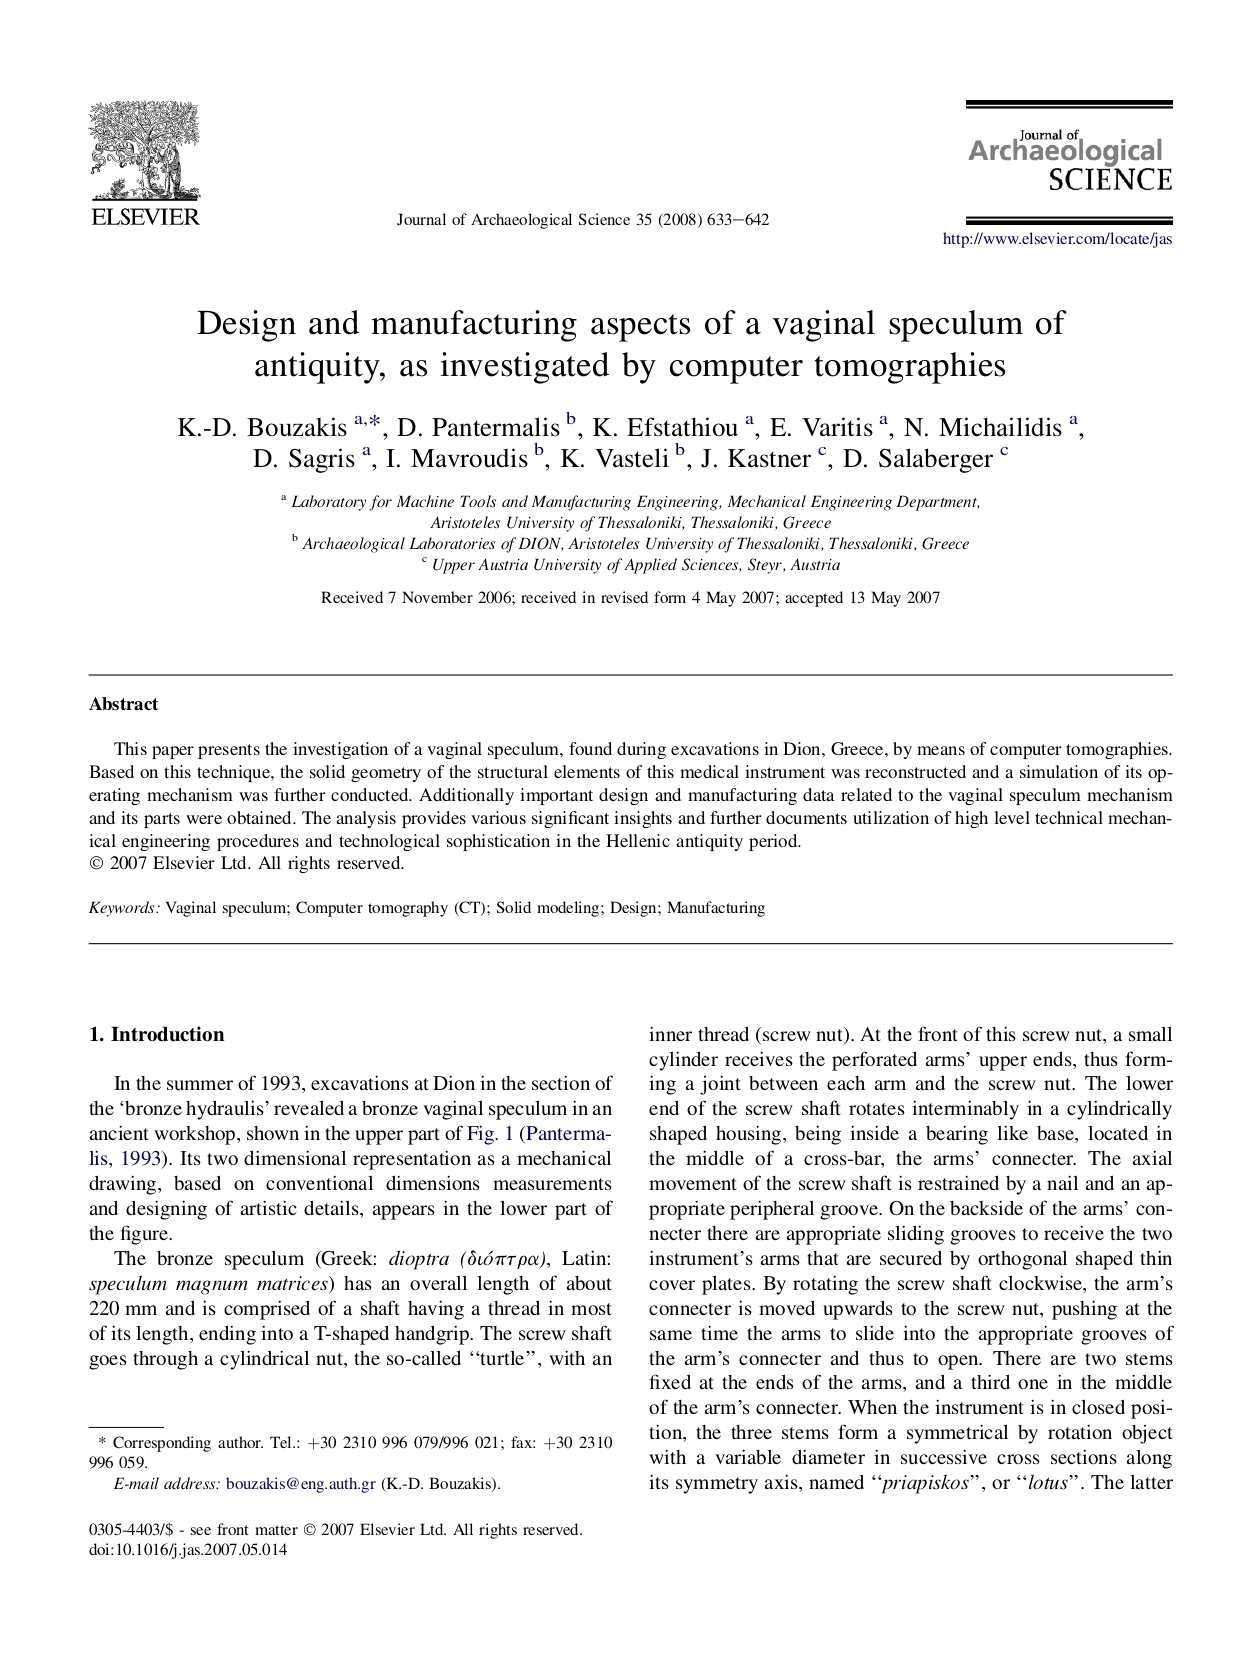 Design and manufacturing aspects of a vaginal speculum of antiquity, as investigated by computer tomographies_page-0001.jpg